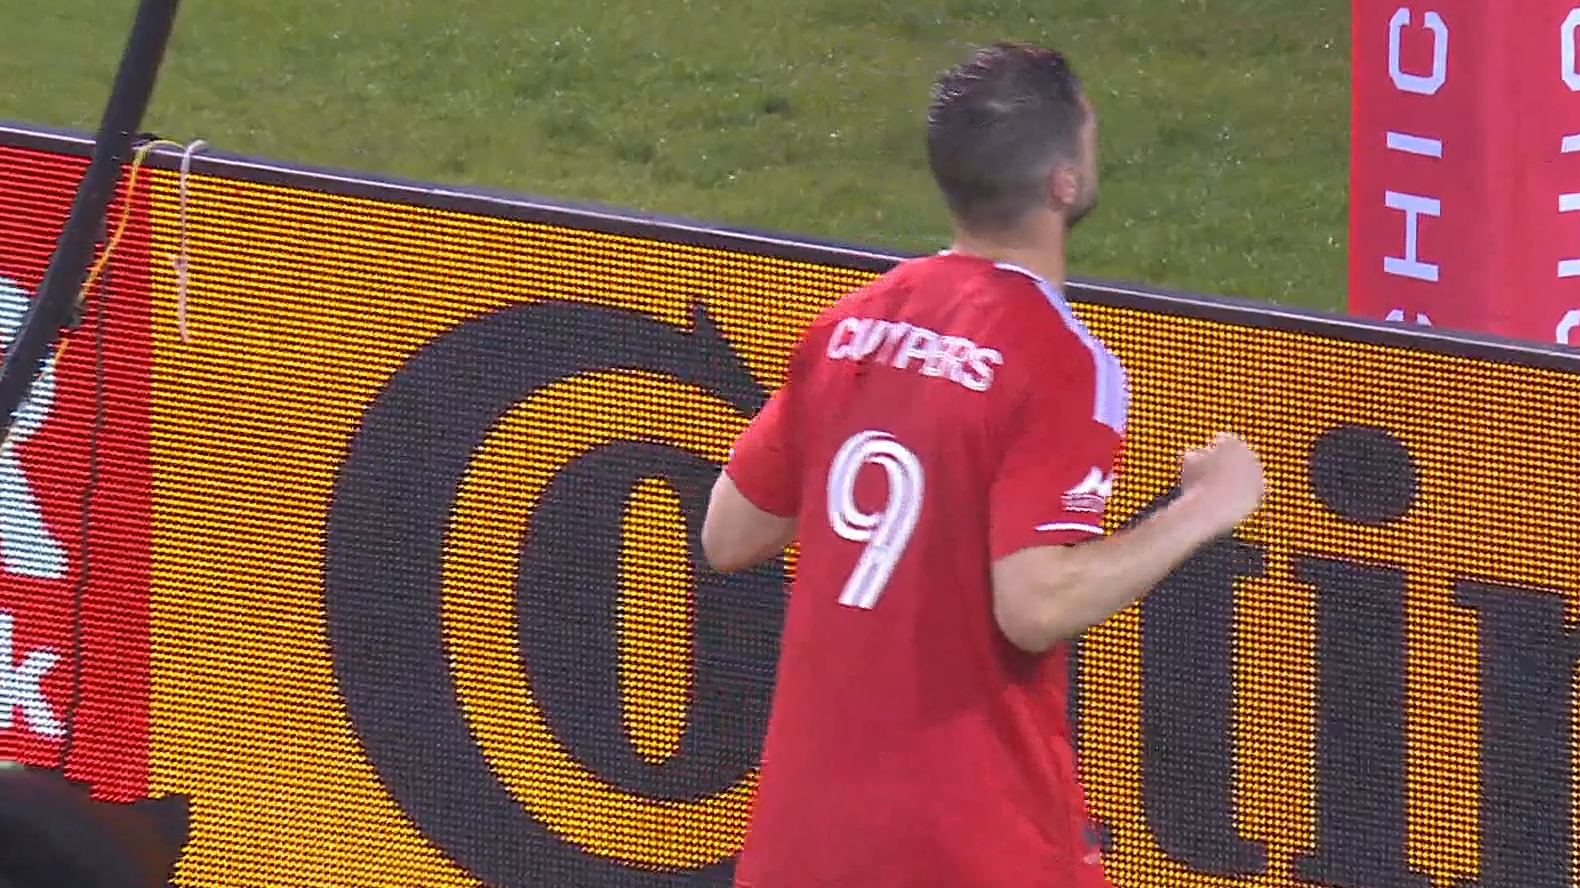 Hugo Cuypers scores to bring the Chicago Fire level